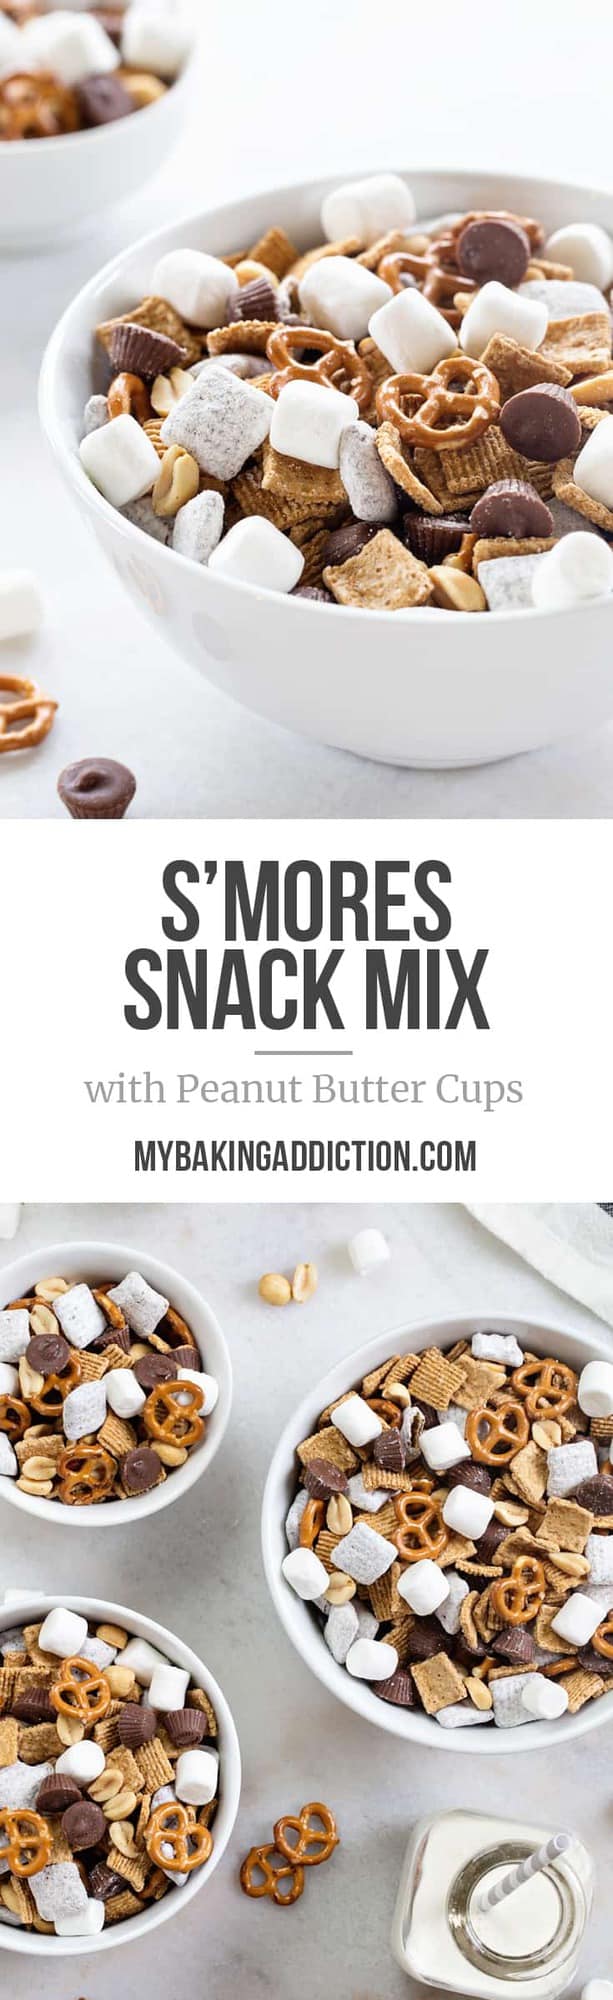 S'mores Snack Mix is bursting with peanut butter flavor thanks to puppy chow and mini peanut butter cups! You're going to love this!